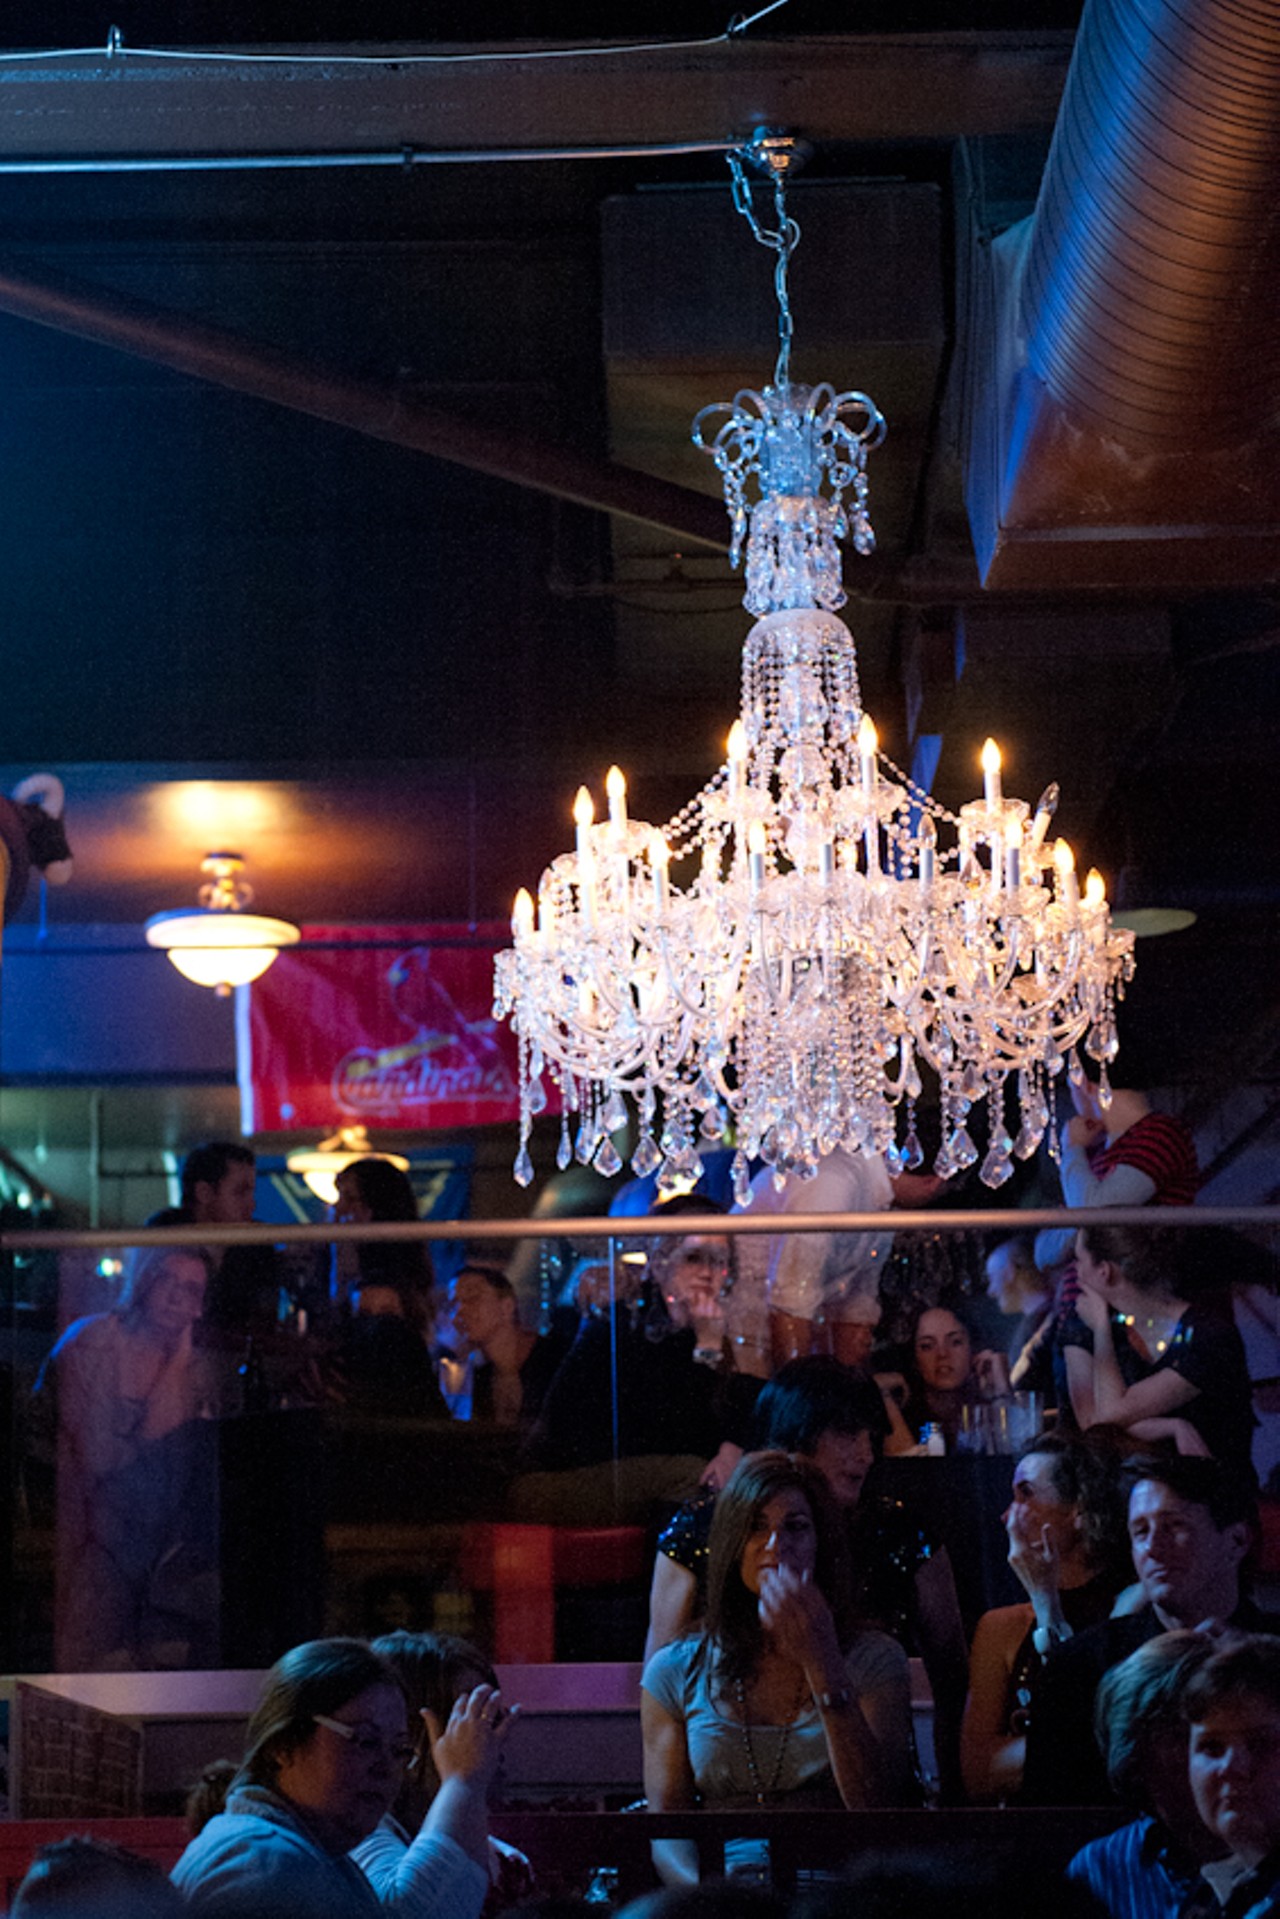 The chandelier that hangs from the ceiling of Hamburger Mary's.